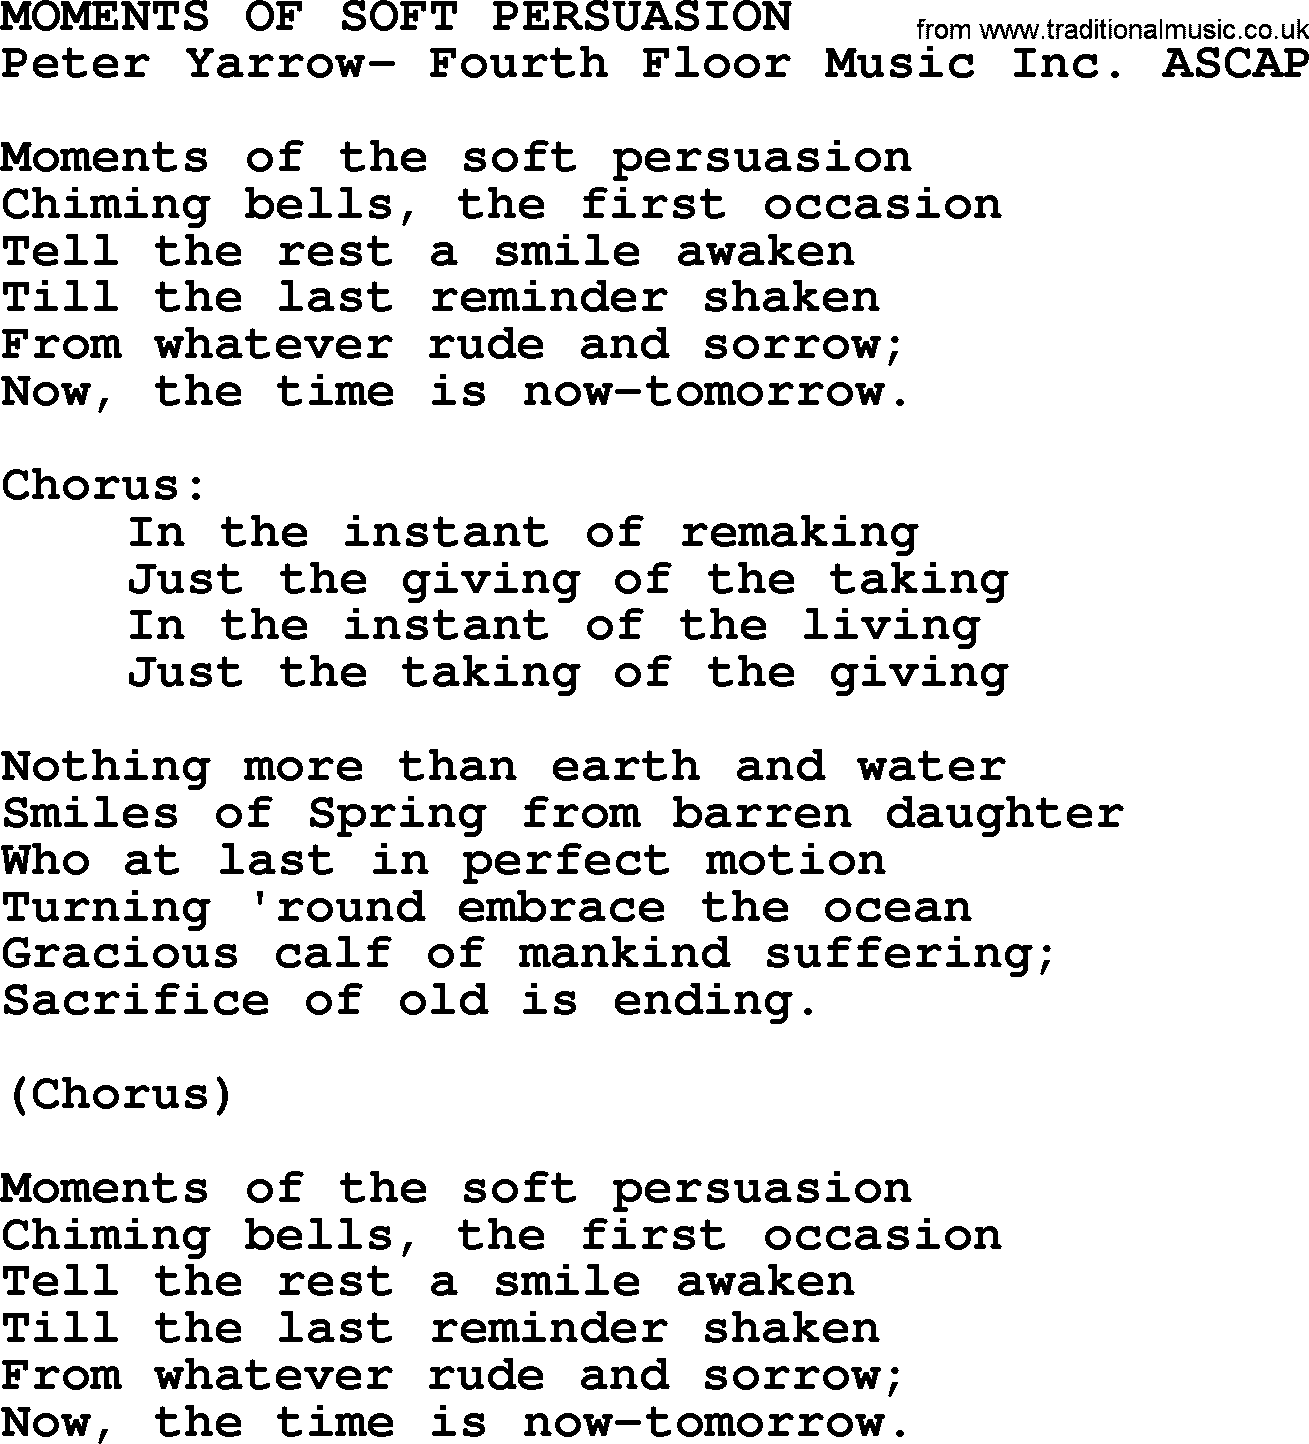 Peter, Paul and Mary song Moments Of Soft Persuasion lyrics